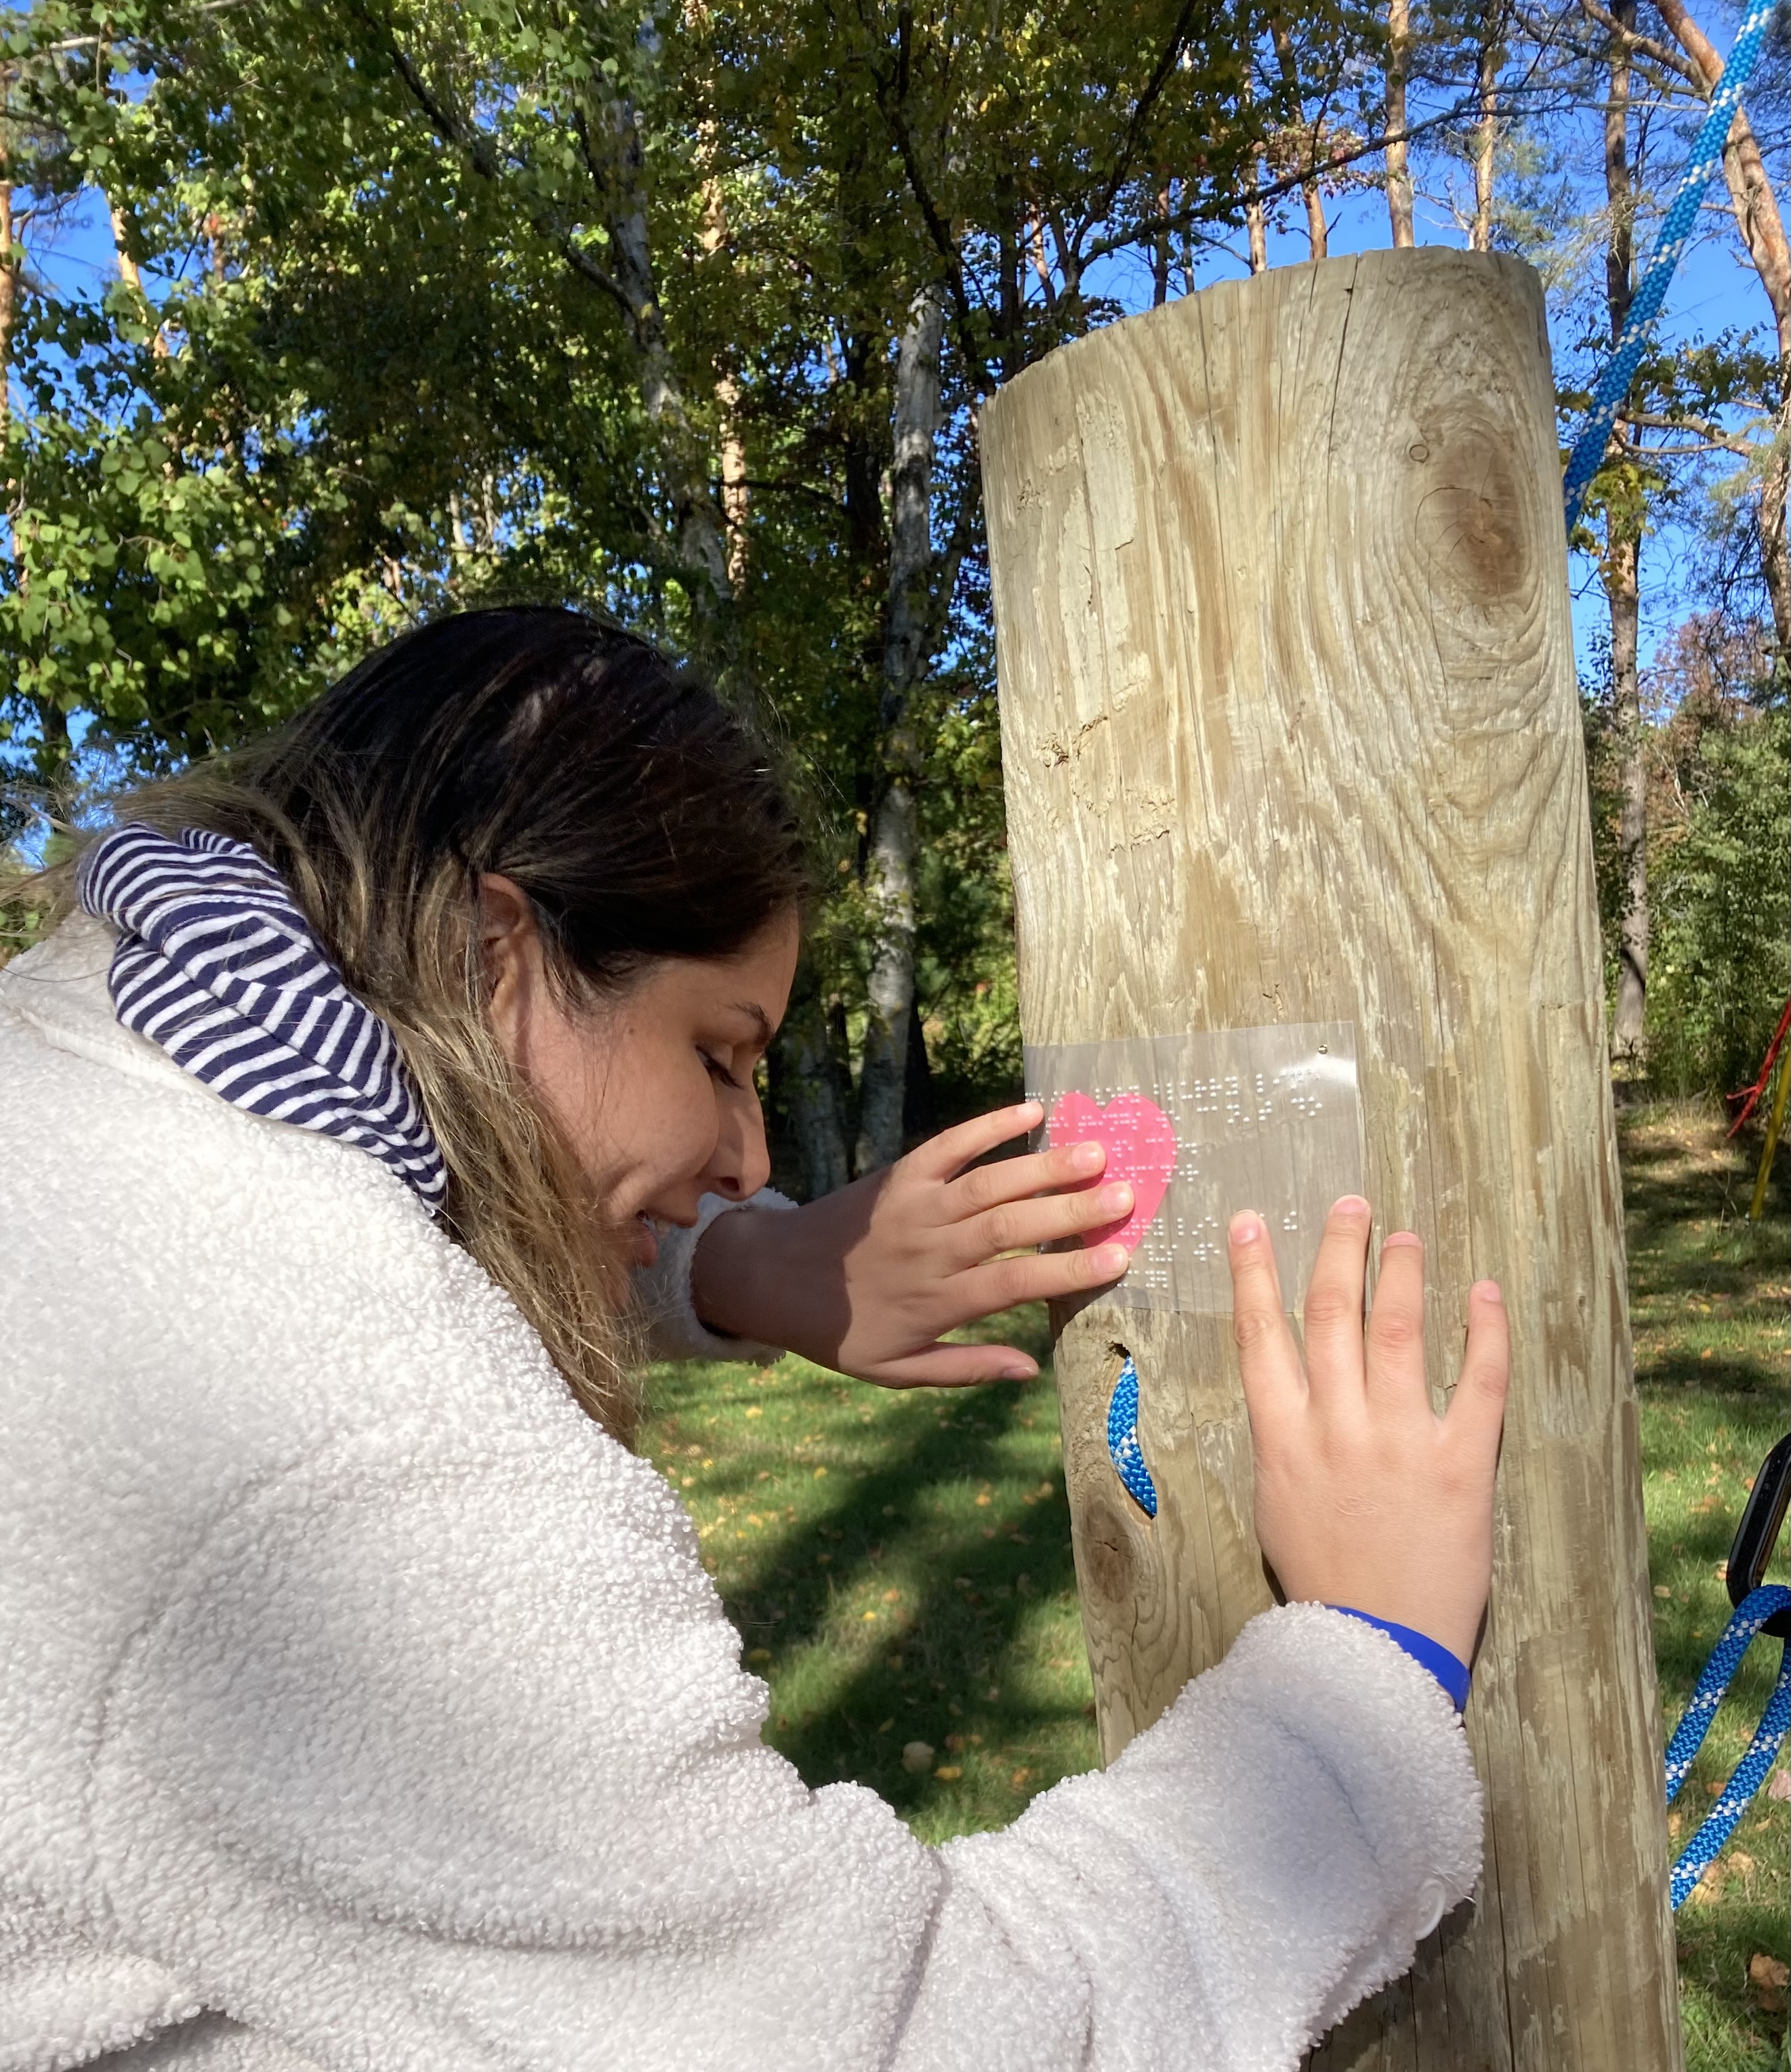 A scavenger hunt clue is posted on the climbing wall at CNIB Lake Joe. The clue is written in braille and a young participant reads the braille clue with their hands.